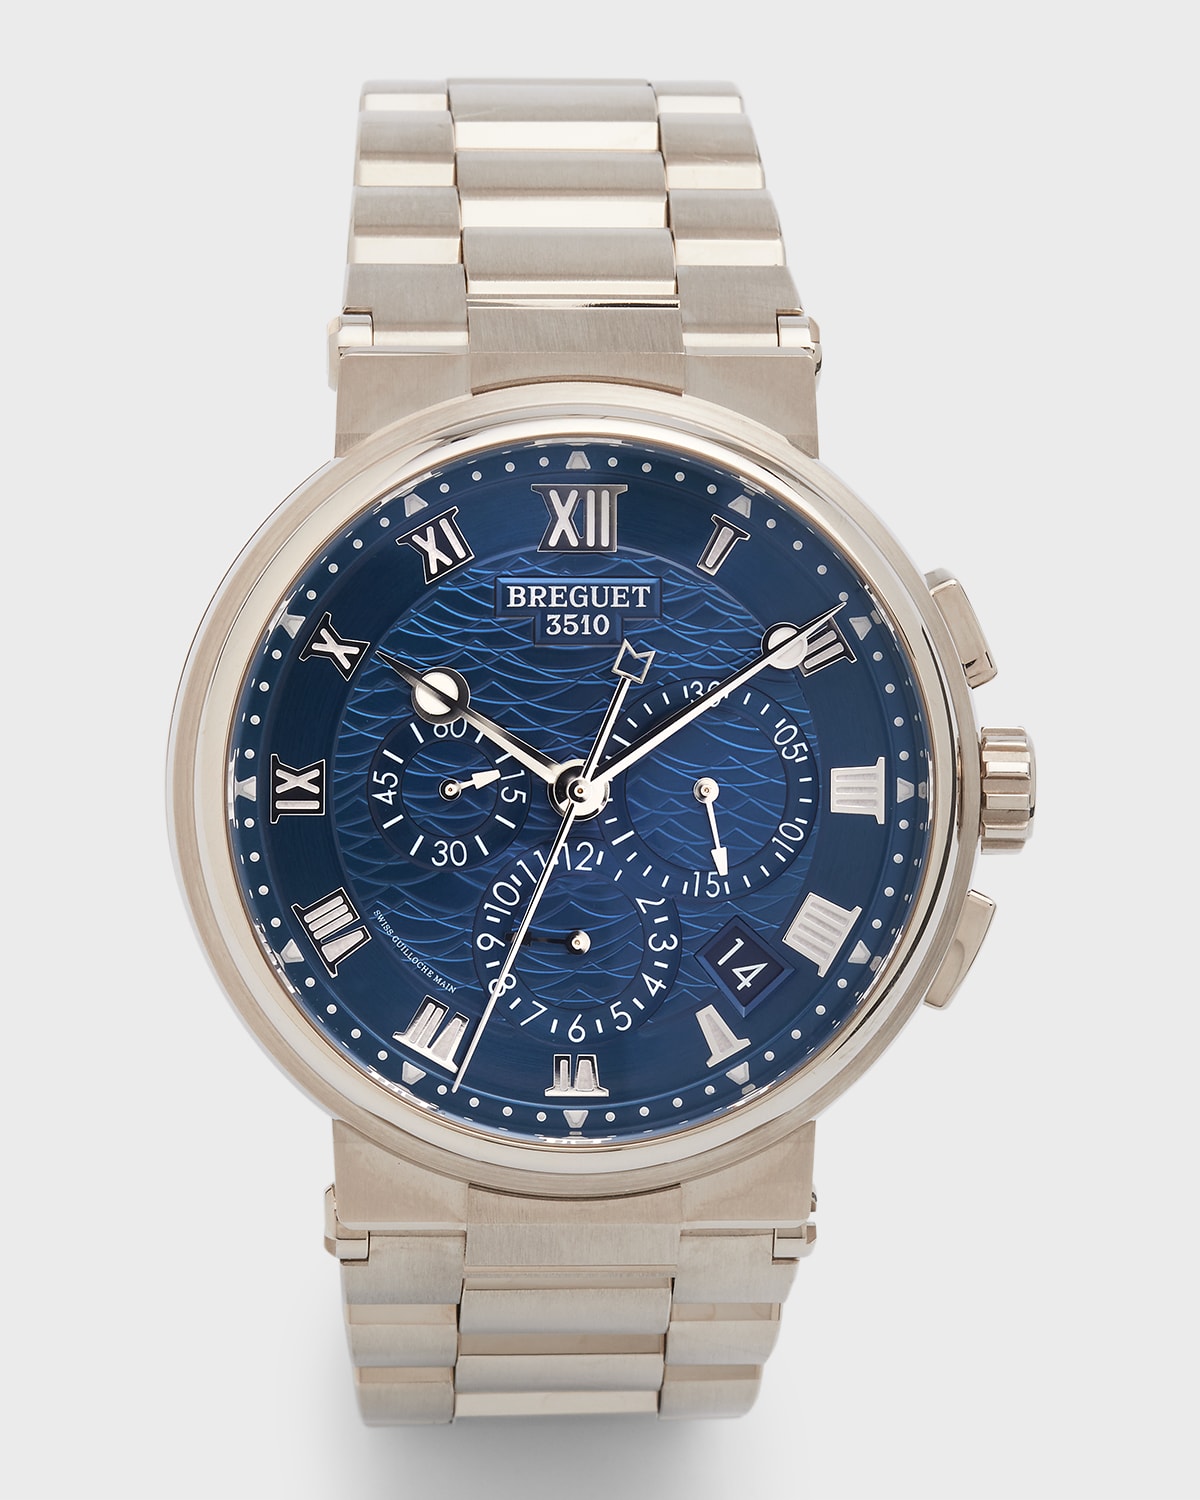 Breguet White Gold Marine Chronograph Blue Dial Watch with Bracelet Strap